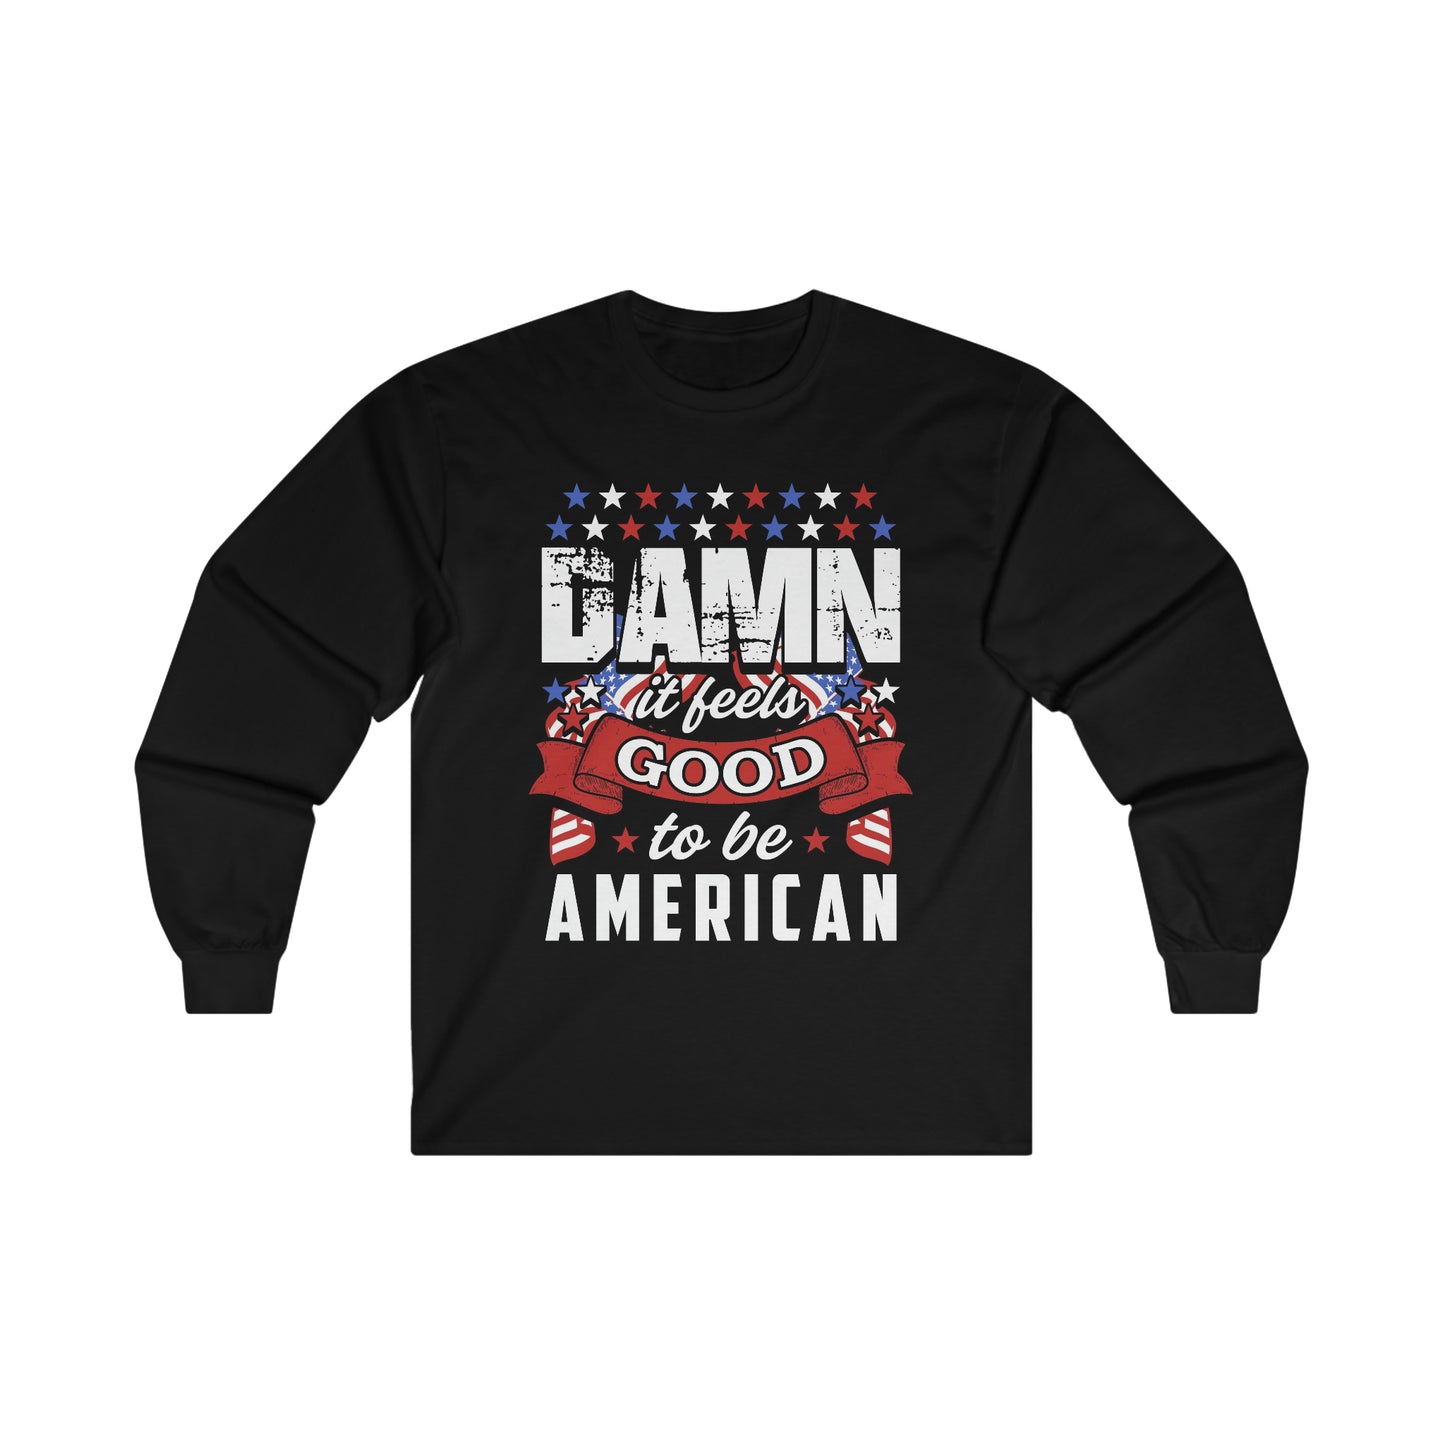 Feels Good to Be an American Ultra Cotton Long Sleeve Tee